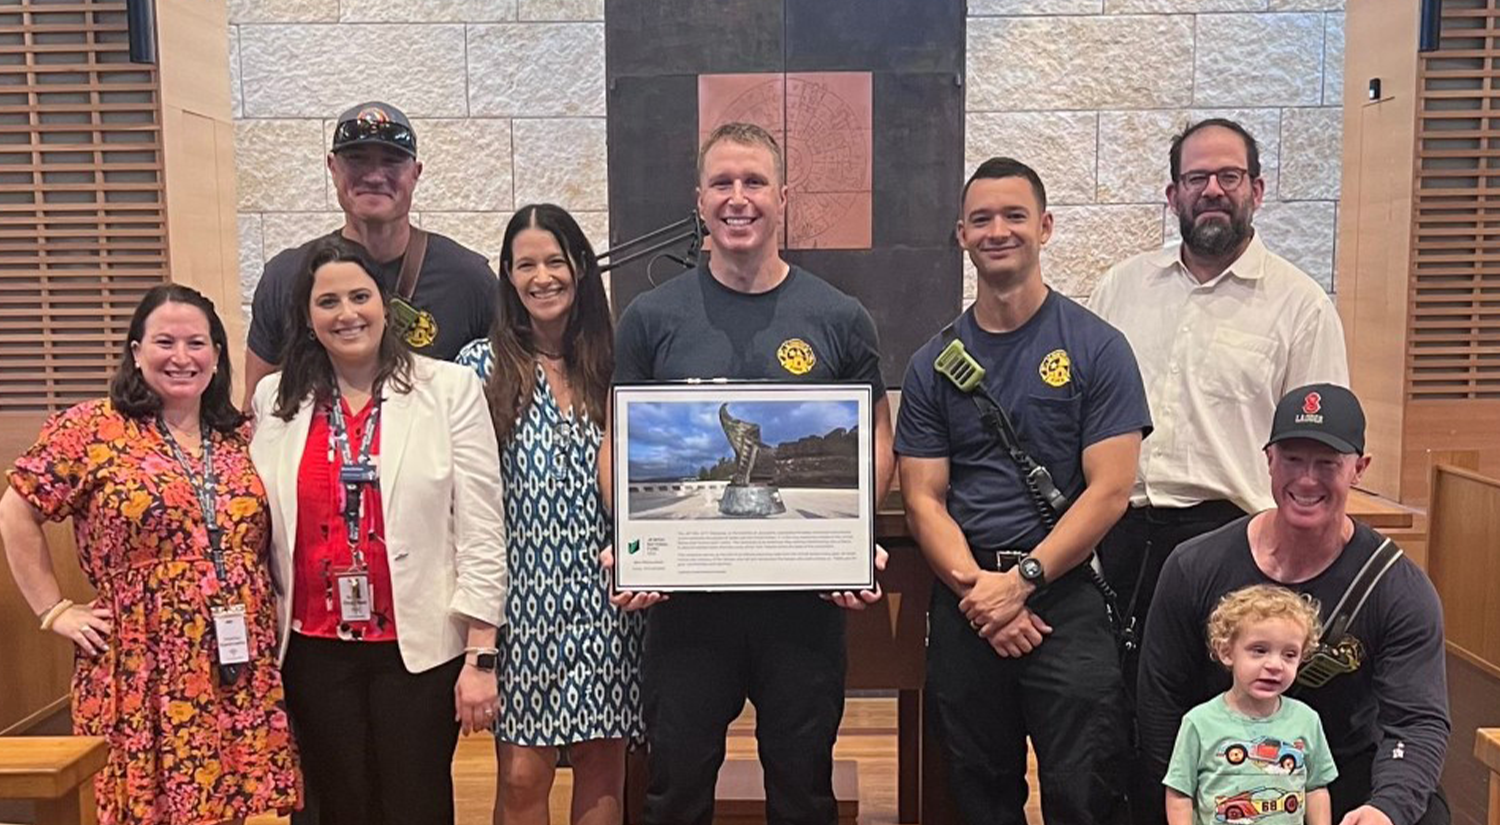 AJA’s Heather Kantrowitz and Brooke Dunshee, JNF-USA’s Galit Birk, Congregation Agudas Achim’s Rabbi Neil Blumofe, and a student from AJA pose with firefighters from Austin Fire Station 21 at a 9/11 ceremony honoring local first responders